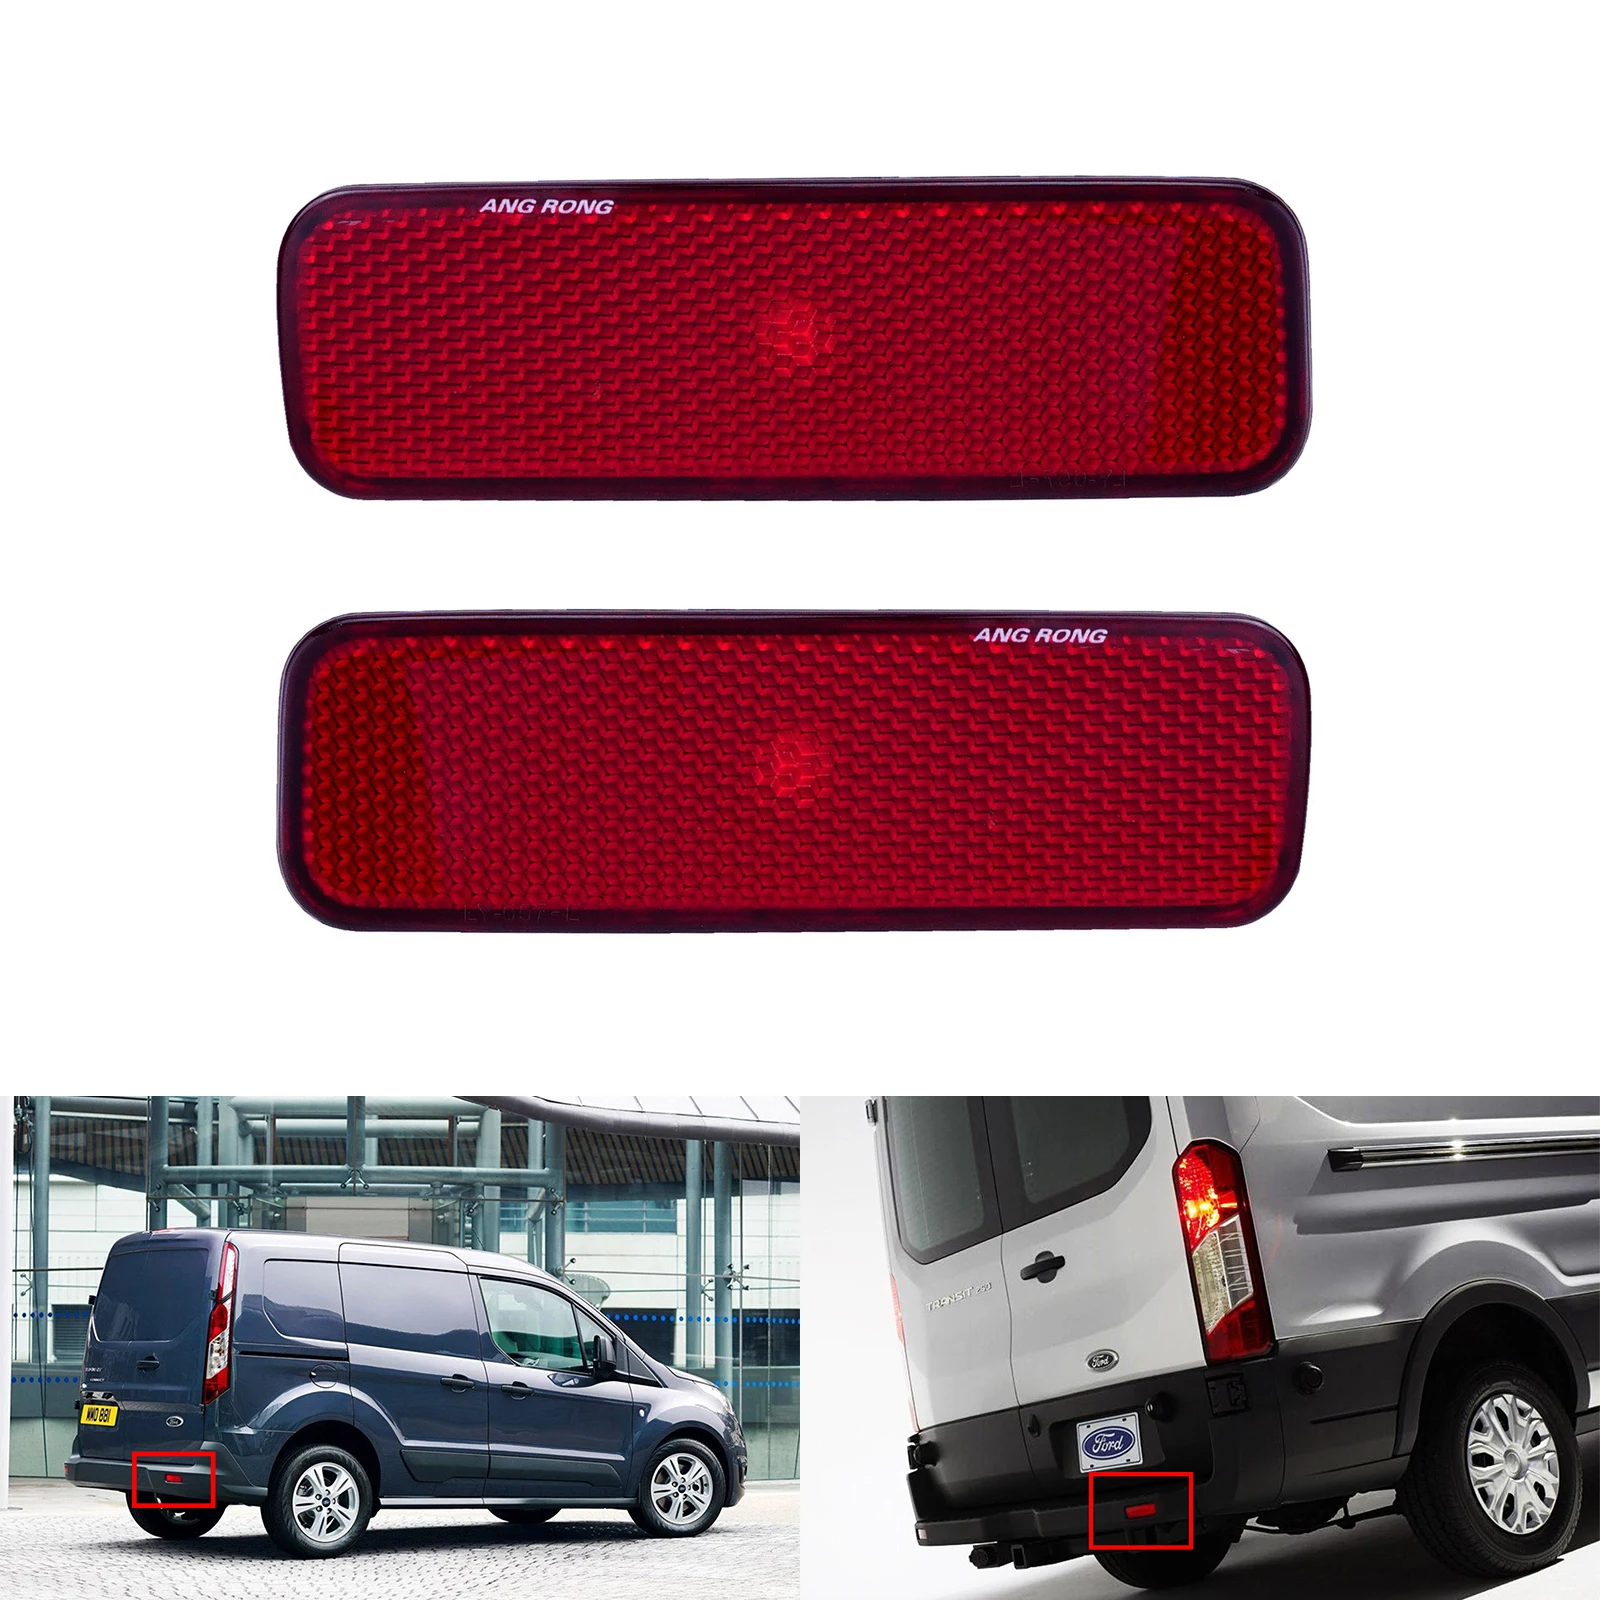 Right Bumper Reflector For 2014-2017 Ford Transit Connect Van//Wagon Rear